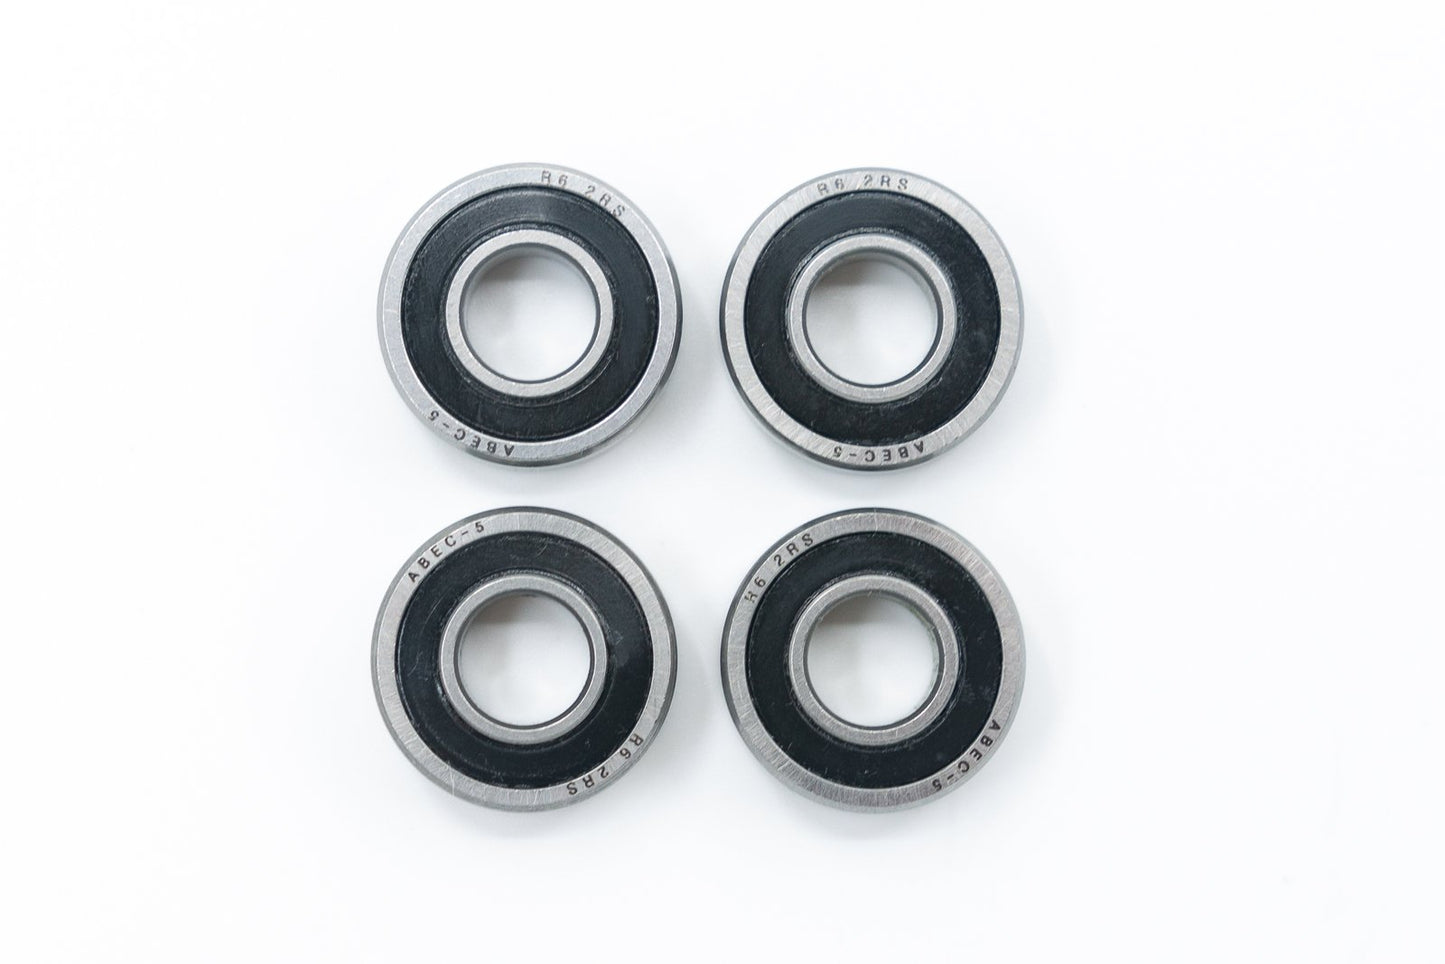 Front Caster Wheelchair Bearings R6 ABEC-5 3/8x7/8x.2812" Serviceable (4-Pack)